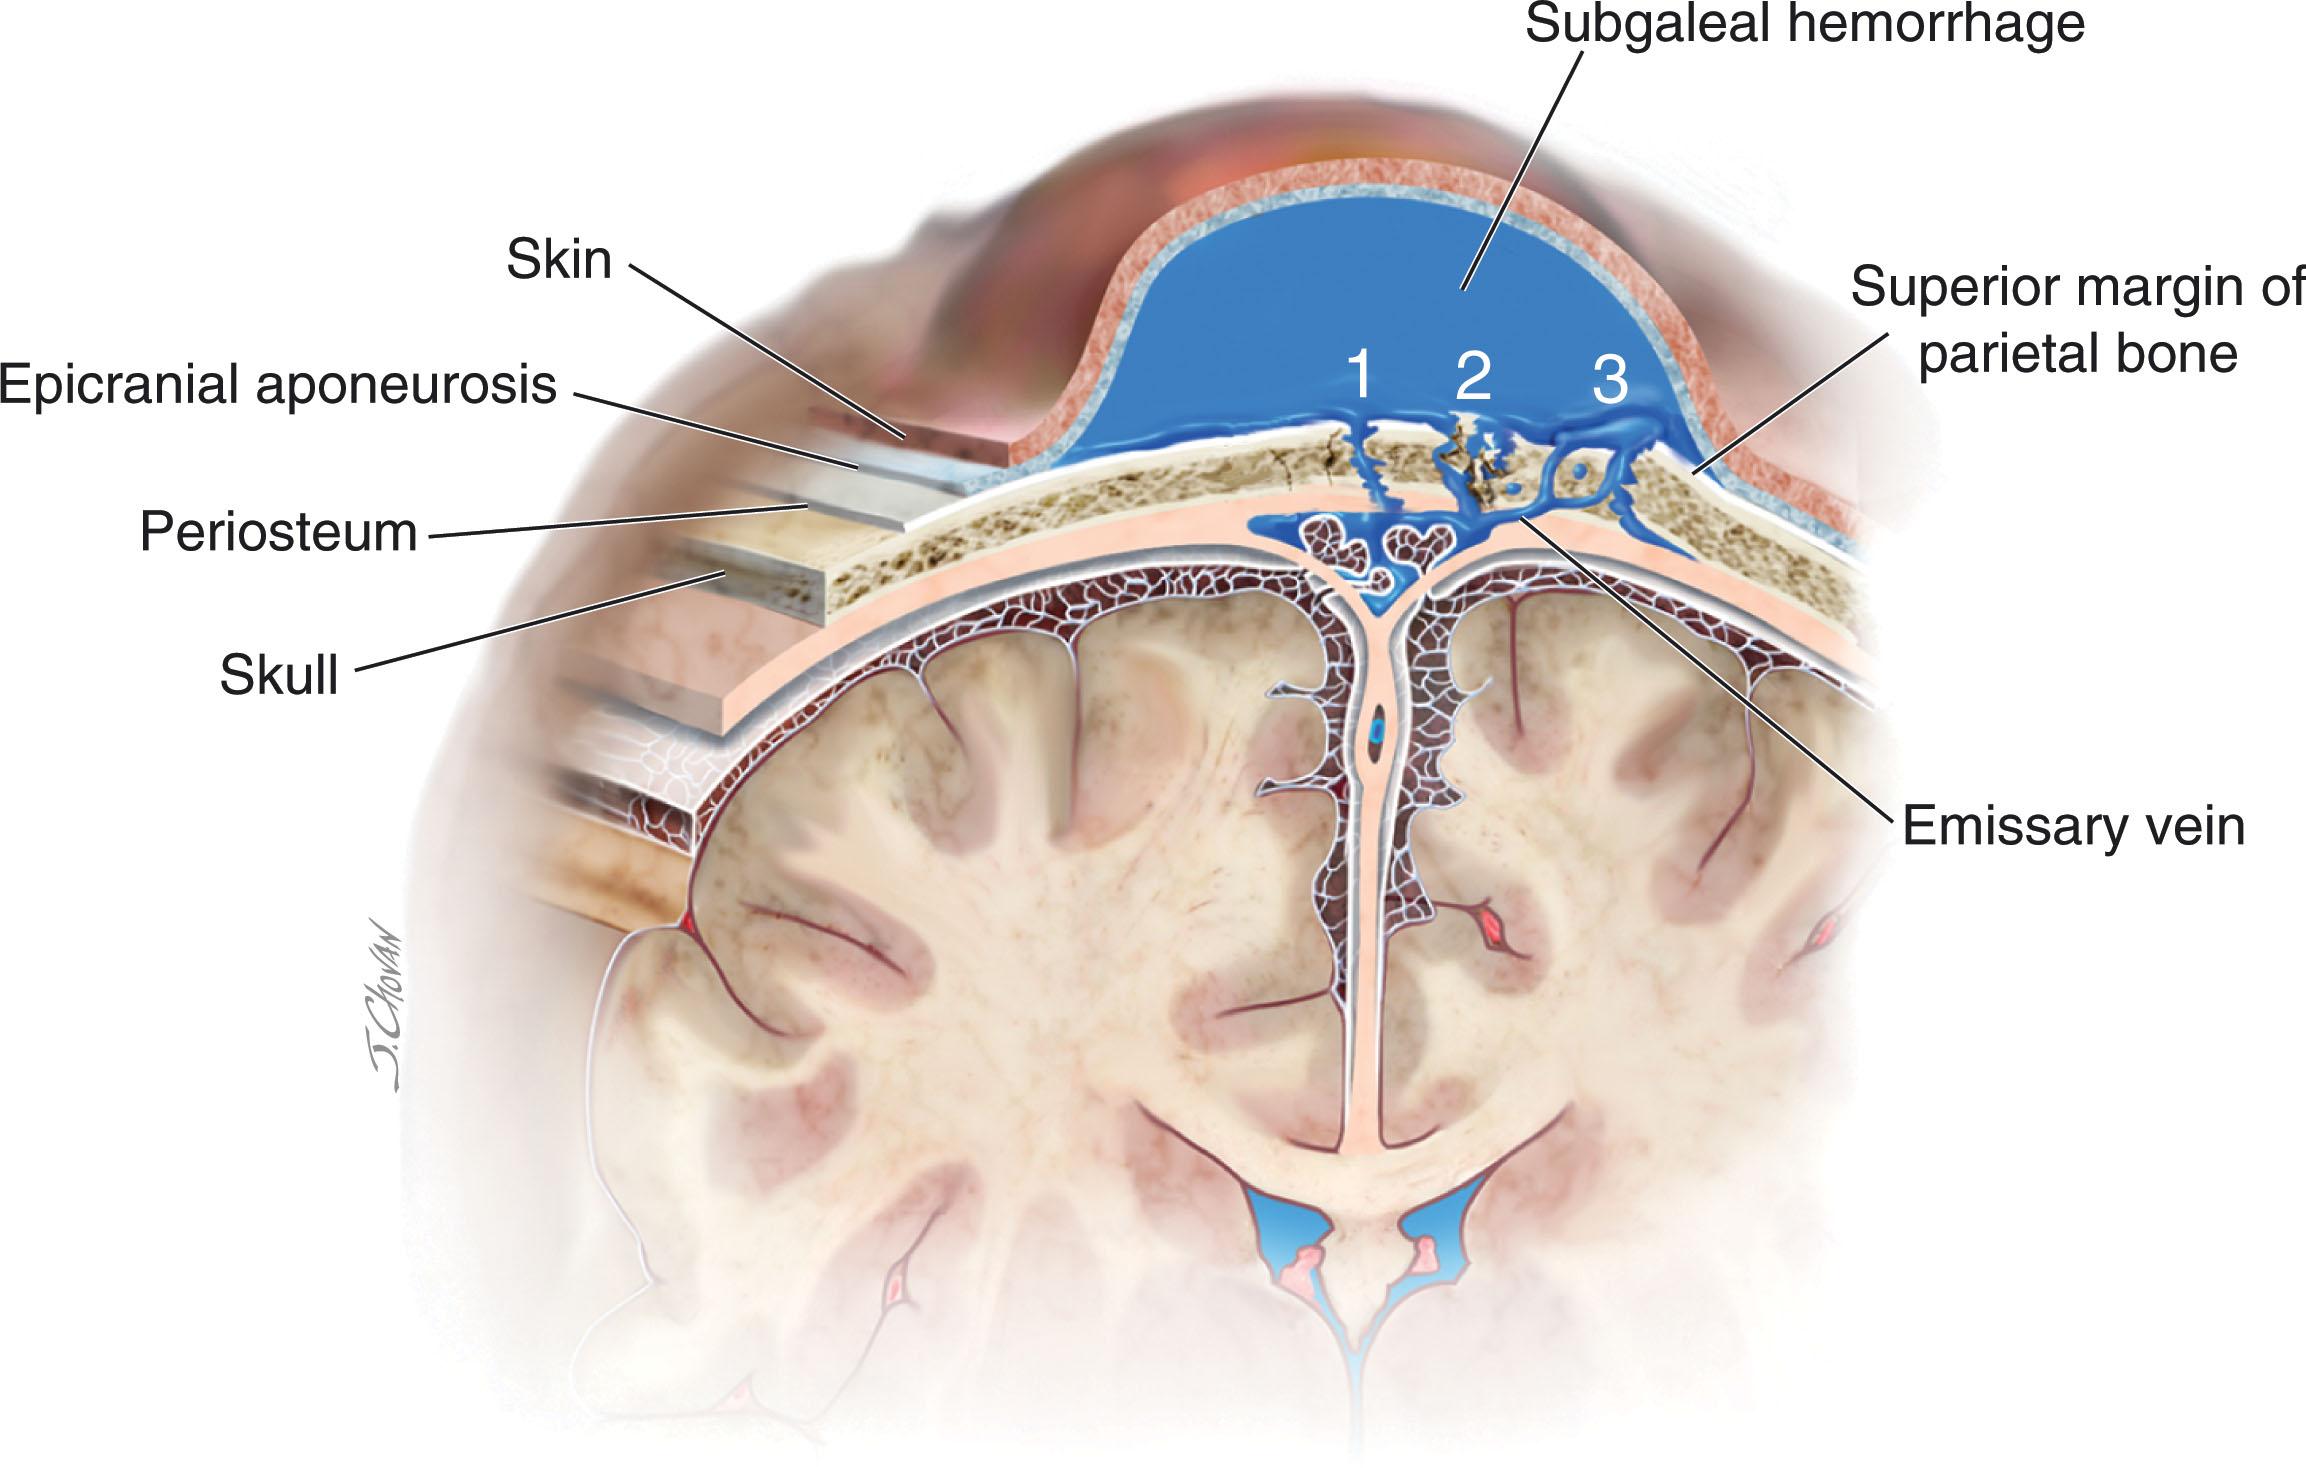 Fig. 40.2, Schematic drawing of the potential events that lead to subgaleal hemorrhage: 1 , suture diastasis, 2 , skull fracture, and 3 , fragmentation of the superior margin of the parietal bone with ruptured emissary vein.